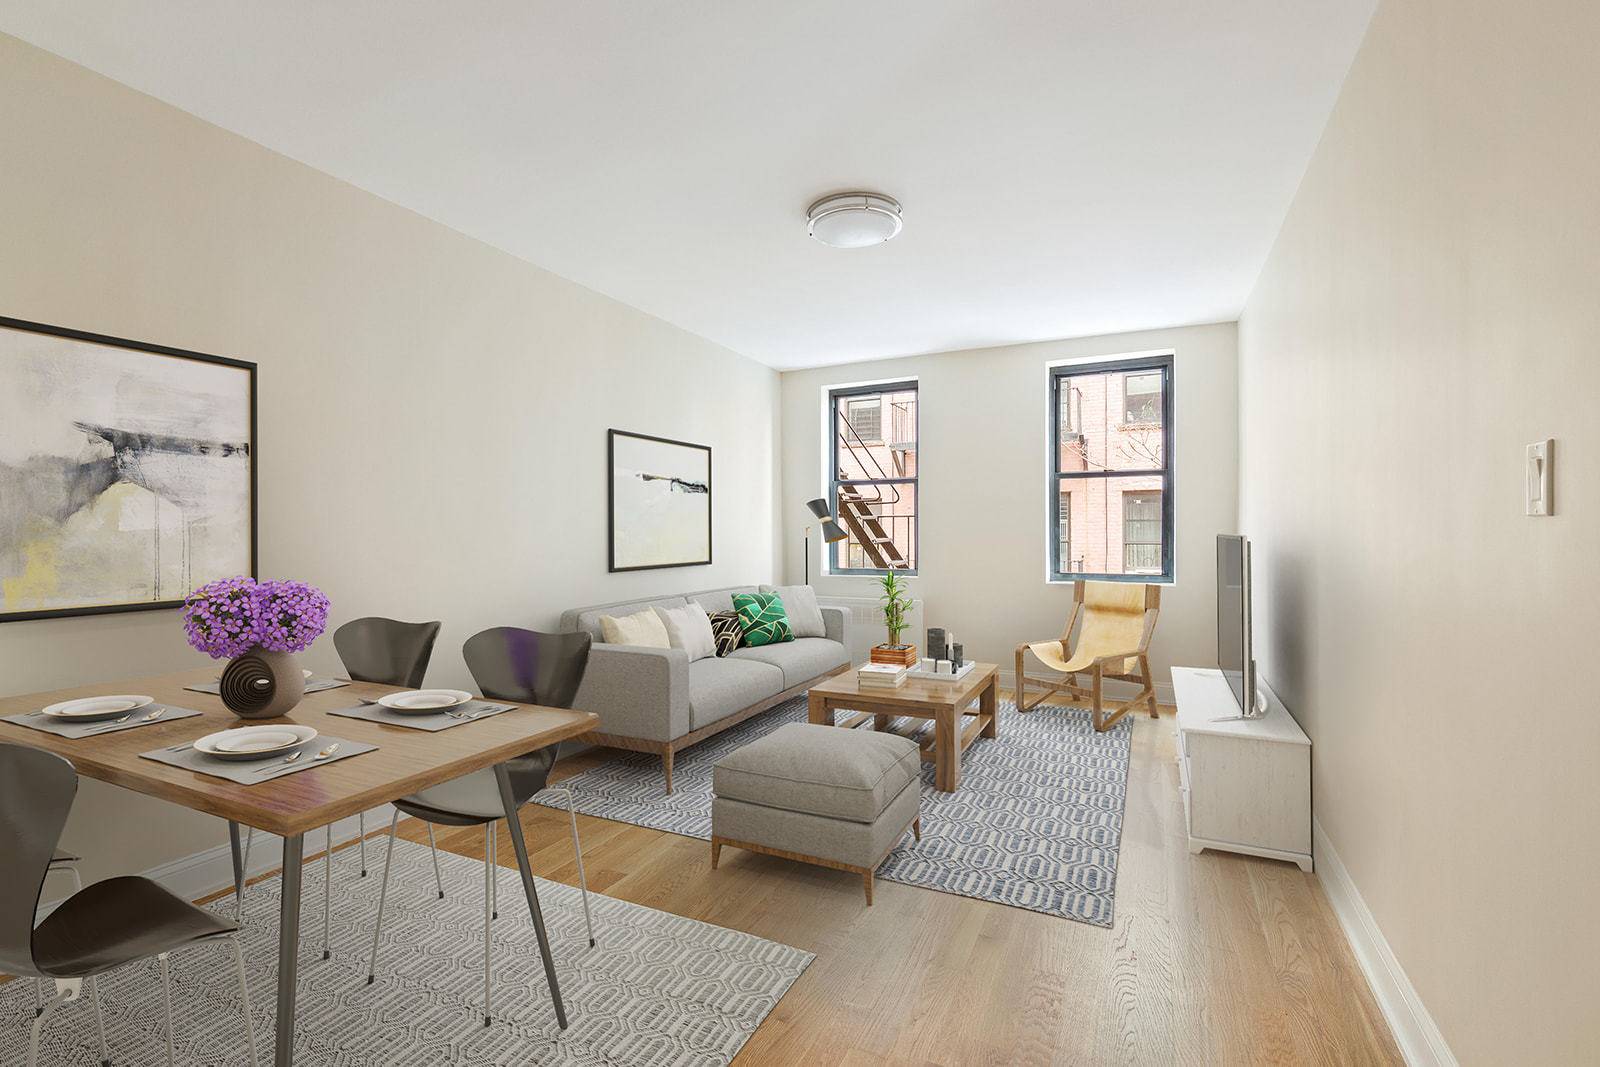 For the price of many studios in Manhattan, you can enjoy the space and sanctuary of this gut renovated 2BR apartment in tranquil Sugar Hill.